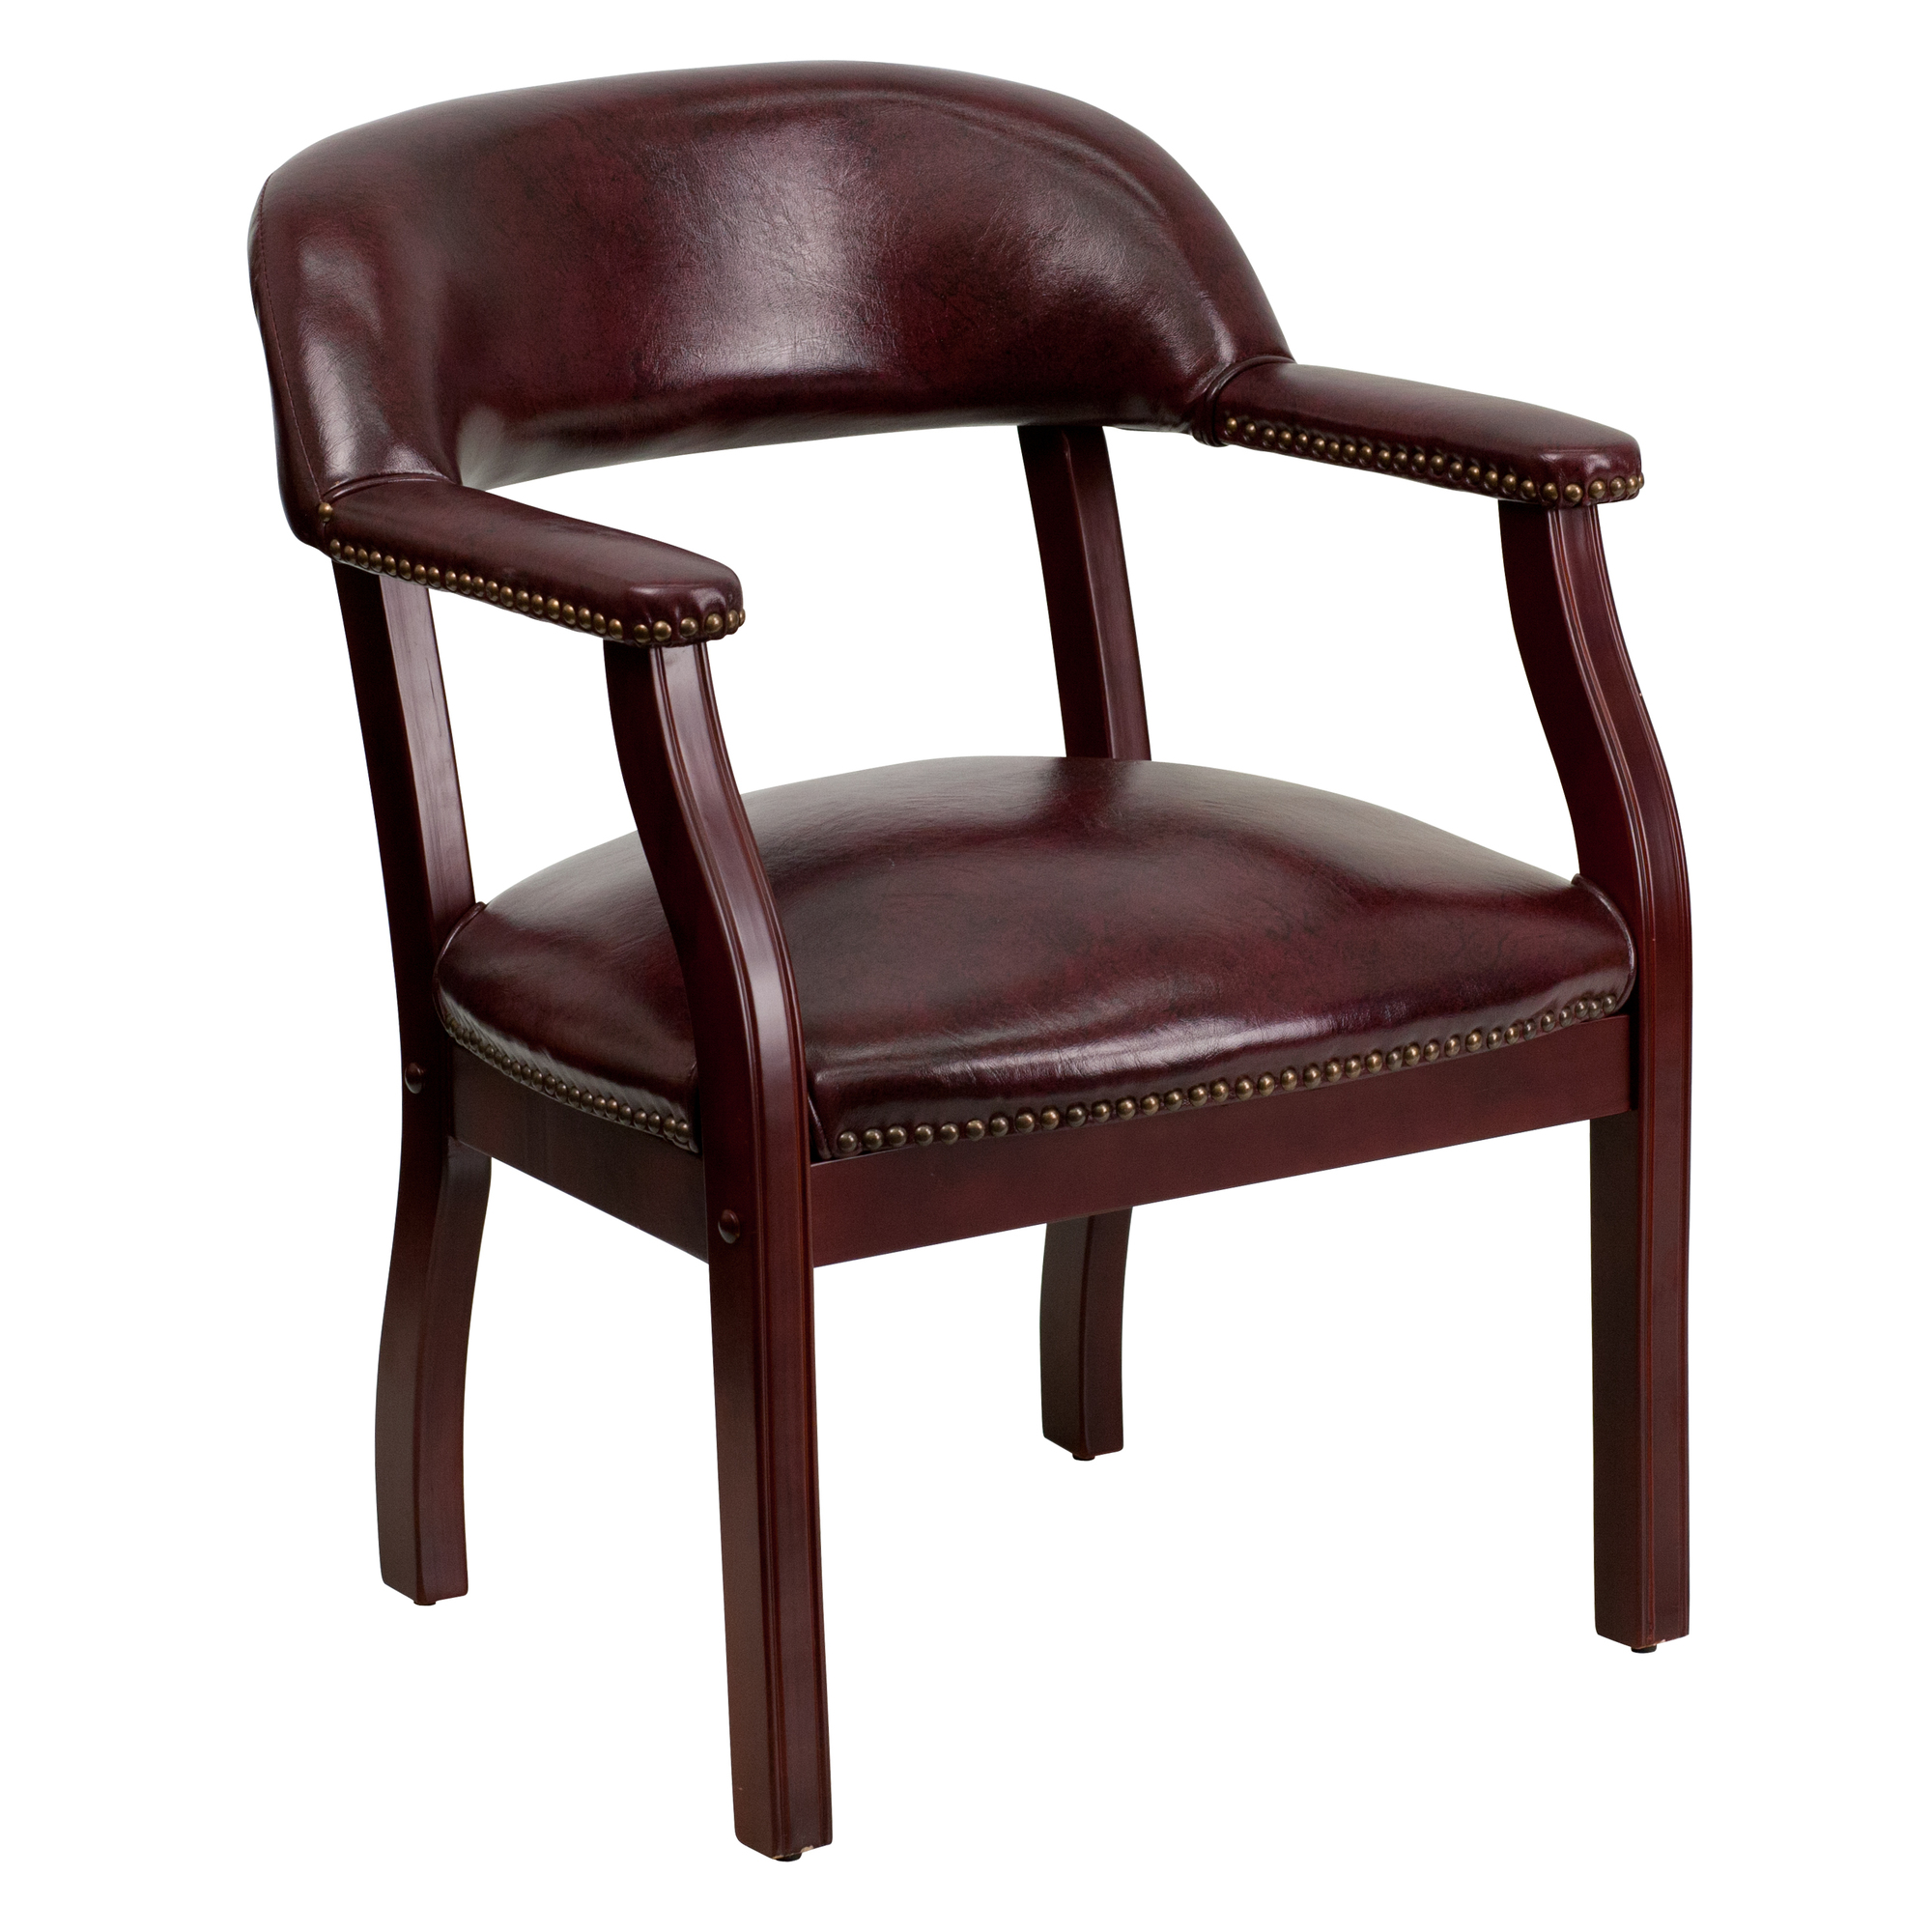 Flash Furniture, Oxblood Vinyl Conference Chair w/ Accent Nail Trim, Primary Color Burgundy, Included (qty.) 1, Model BZ105OXBLD